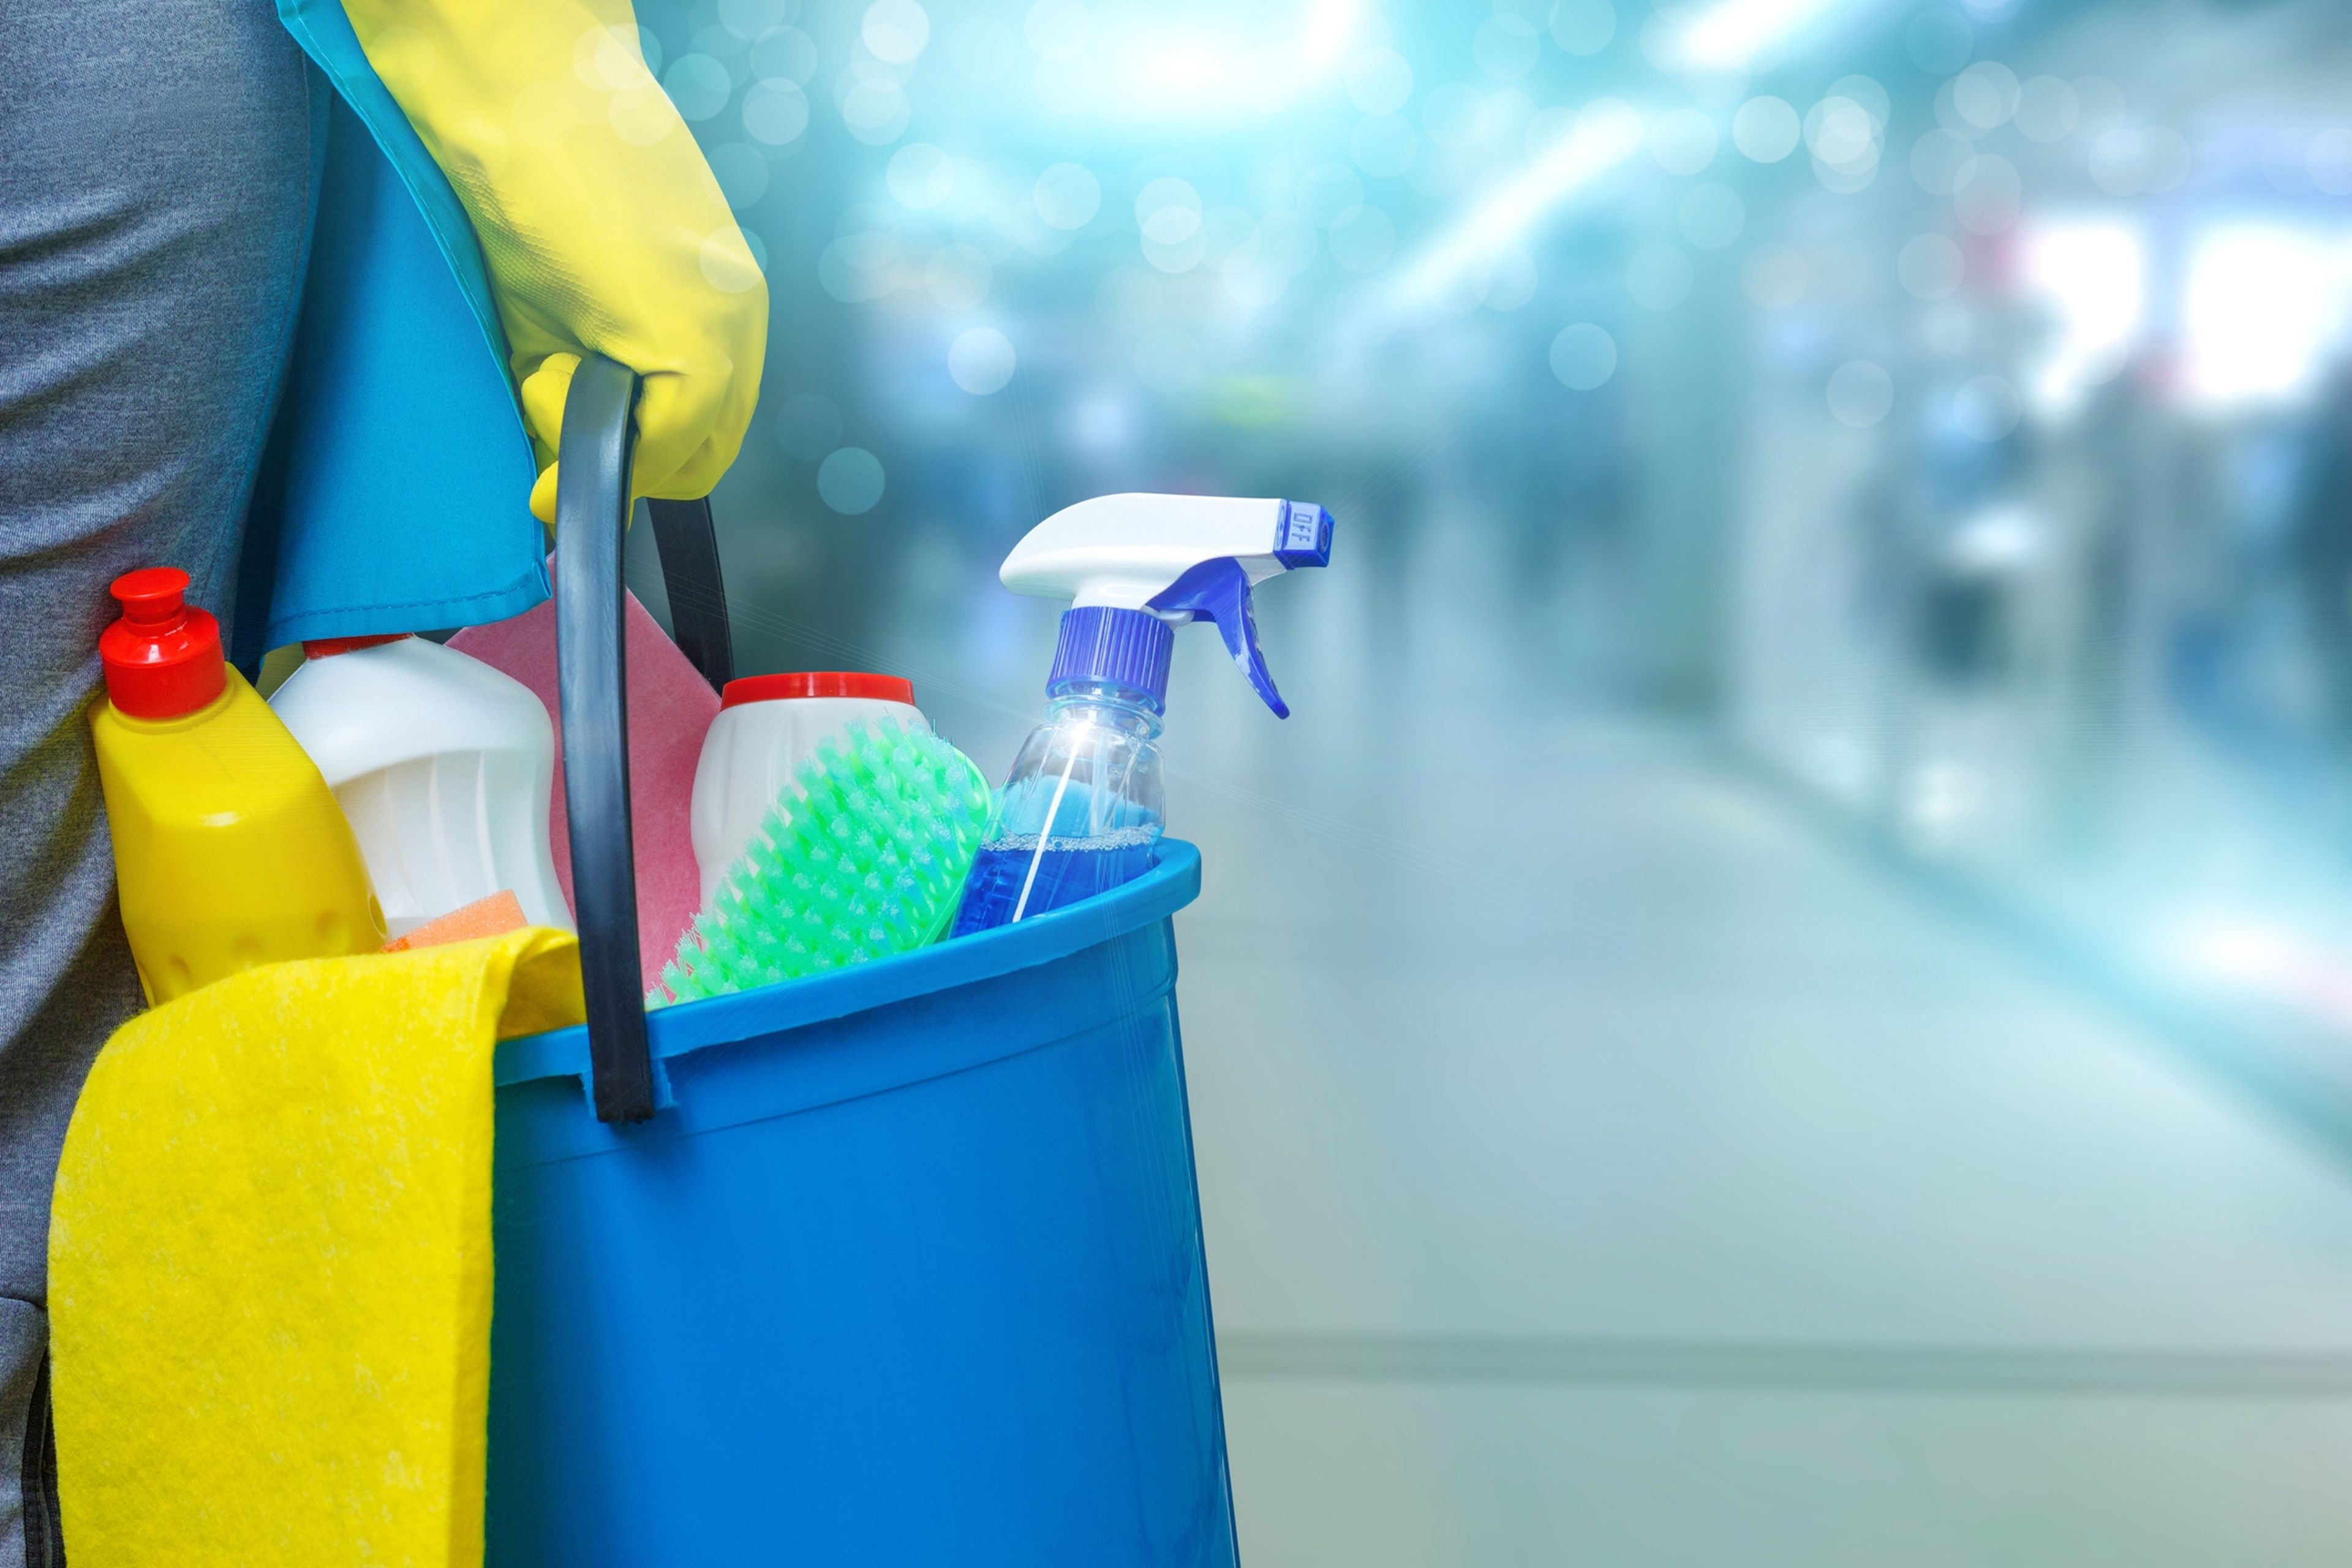 These are the cleaning products you should never mix: they produce toxic clouds, irritating liquids... and even explosions!